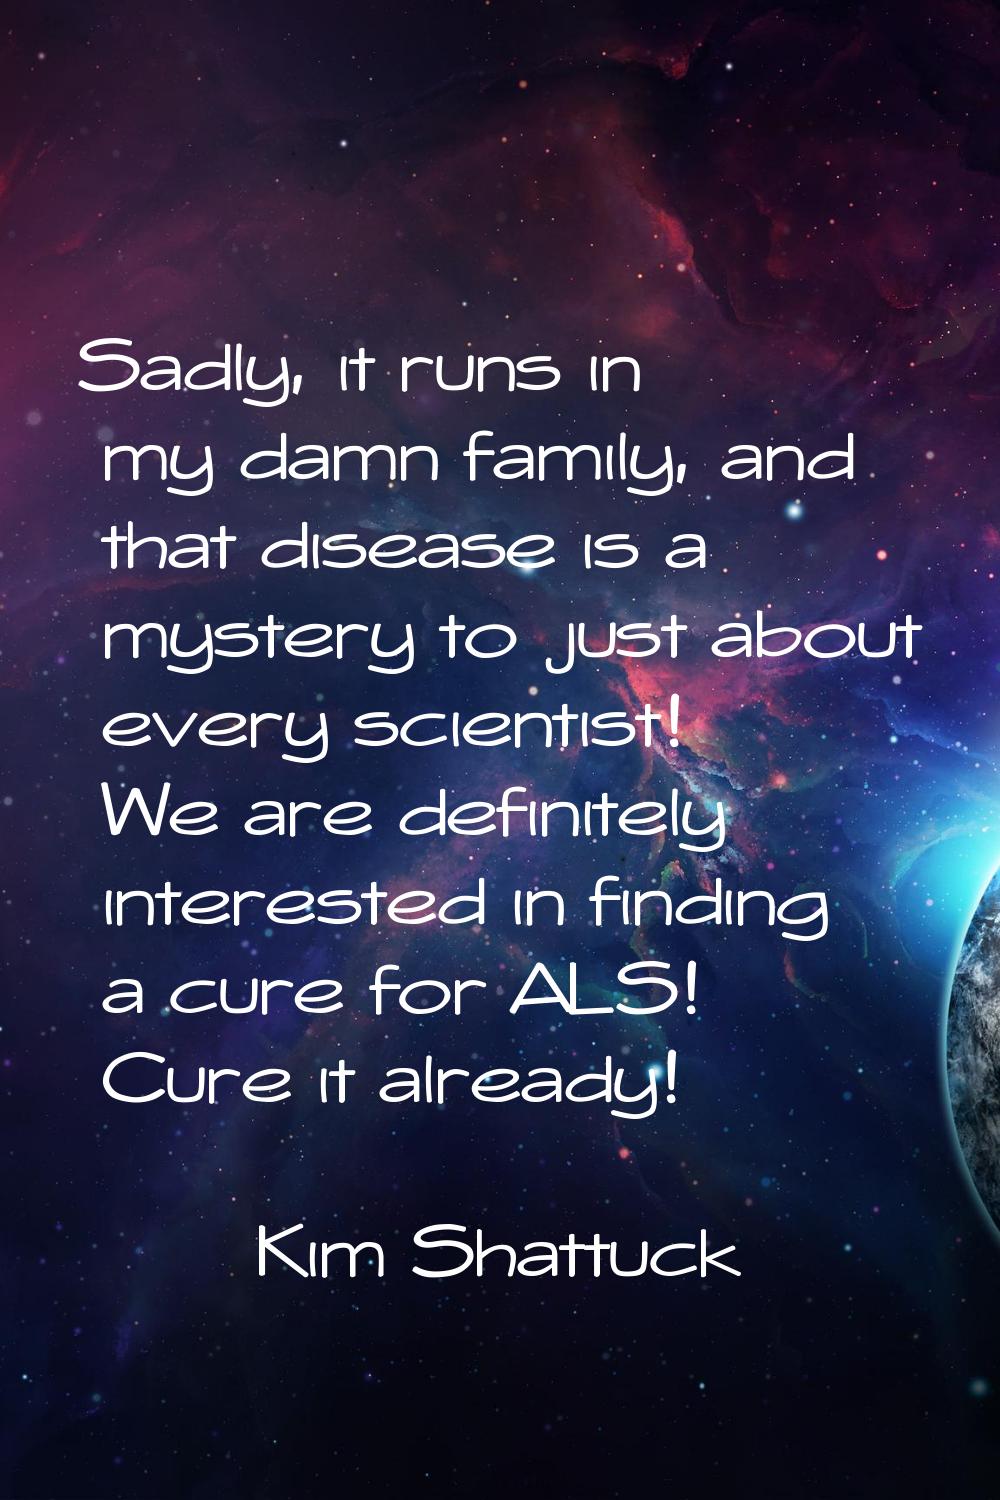 Sadly, it runs in my damn family, and that disease is a mystery to just about every scientist! We a